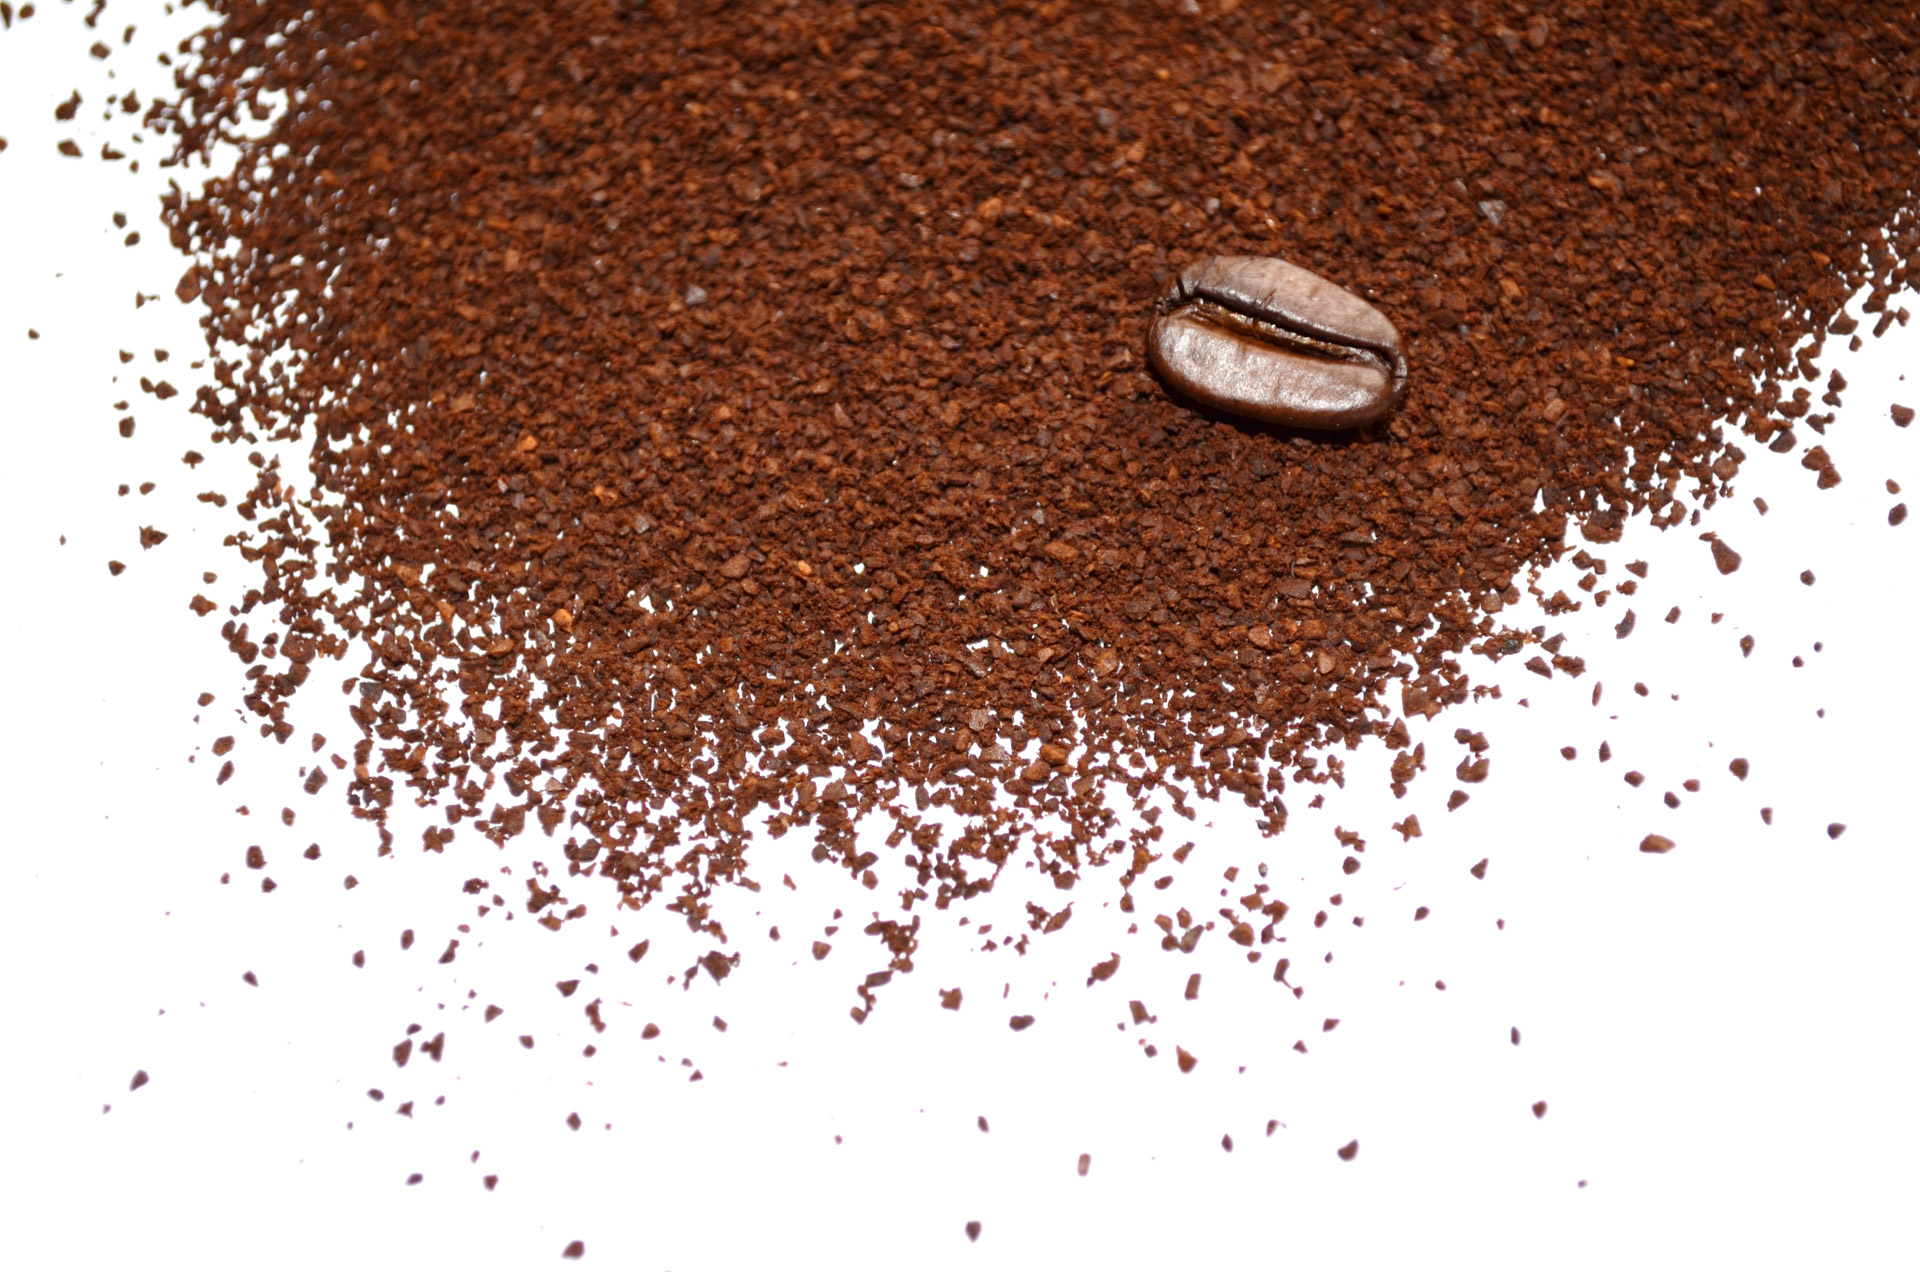 Image: Functional recycling: Spent coffee grounds can make soil more fertile